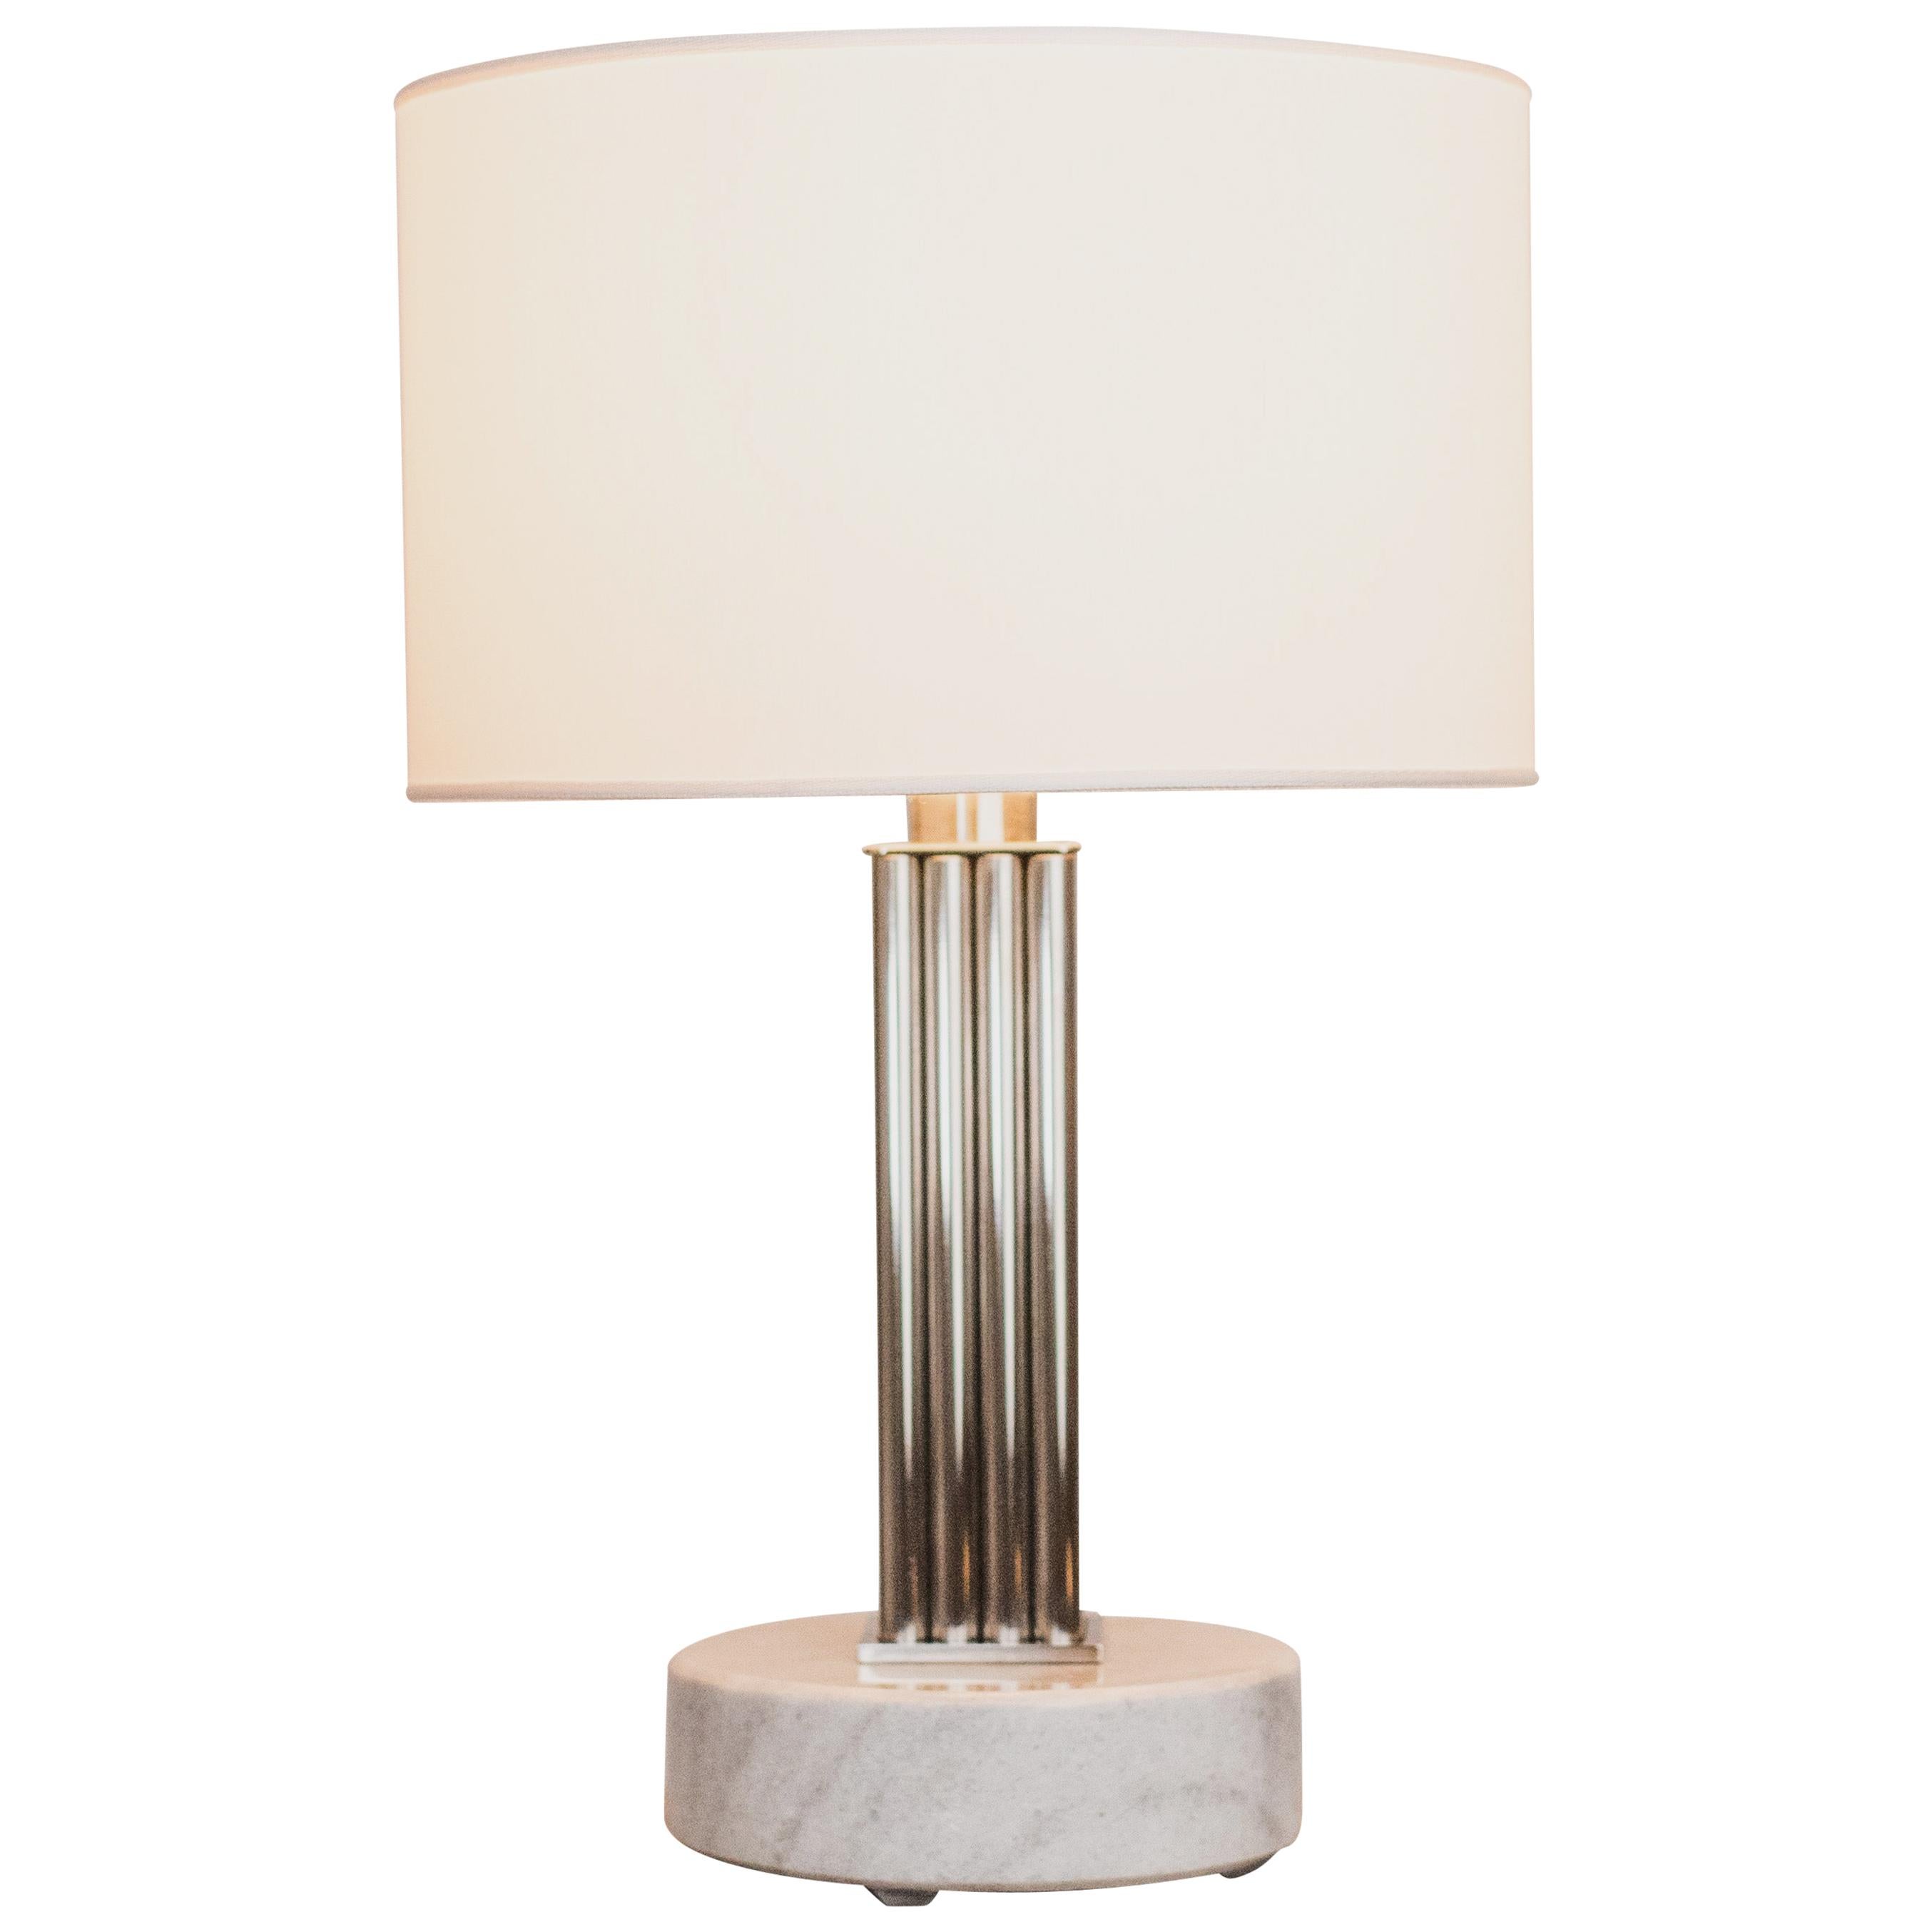 Brass Sculpted Table Lamp by Bijelić and Brajak